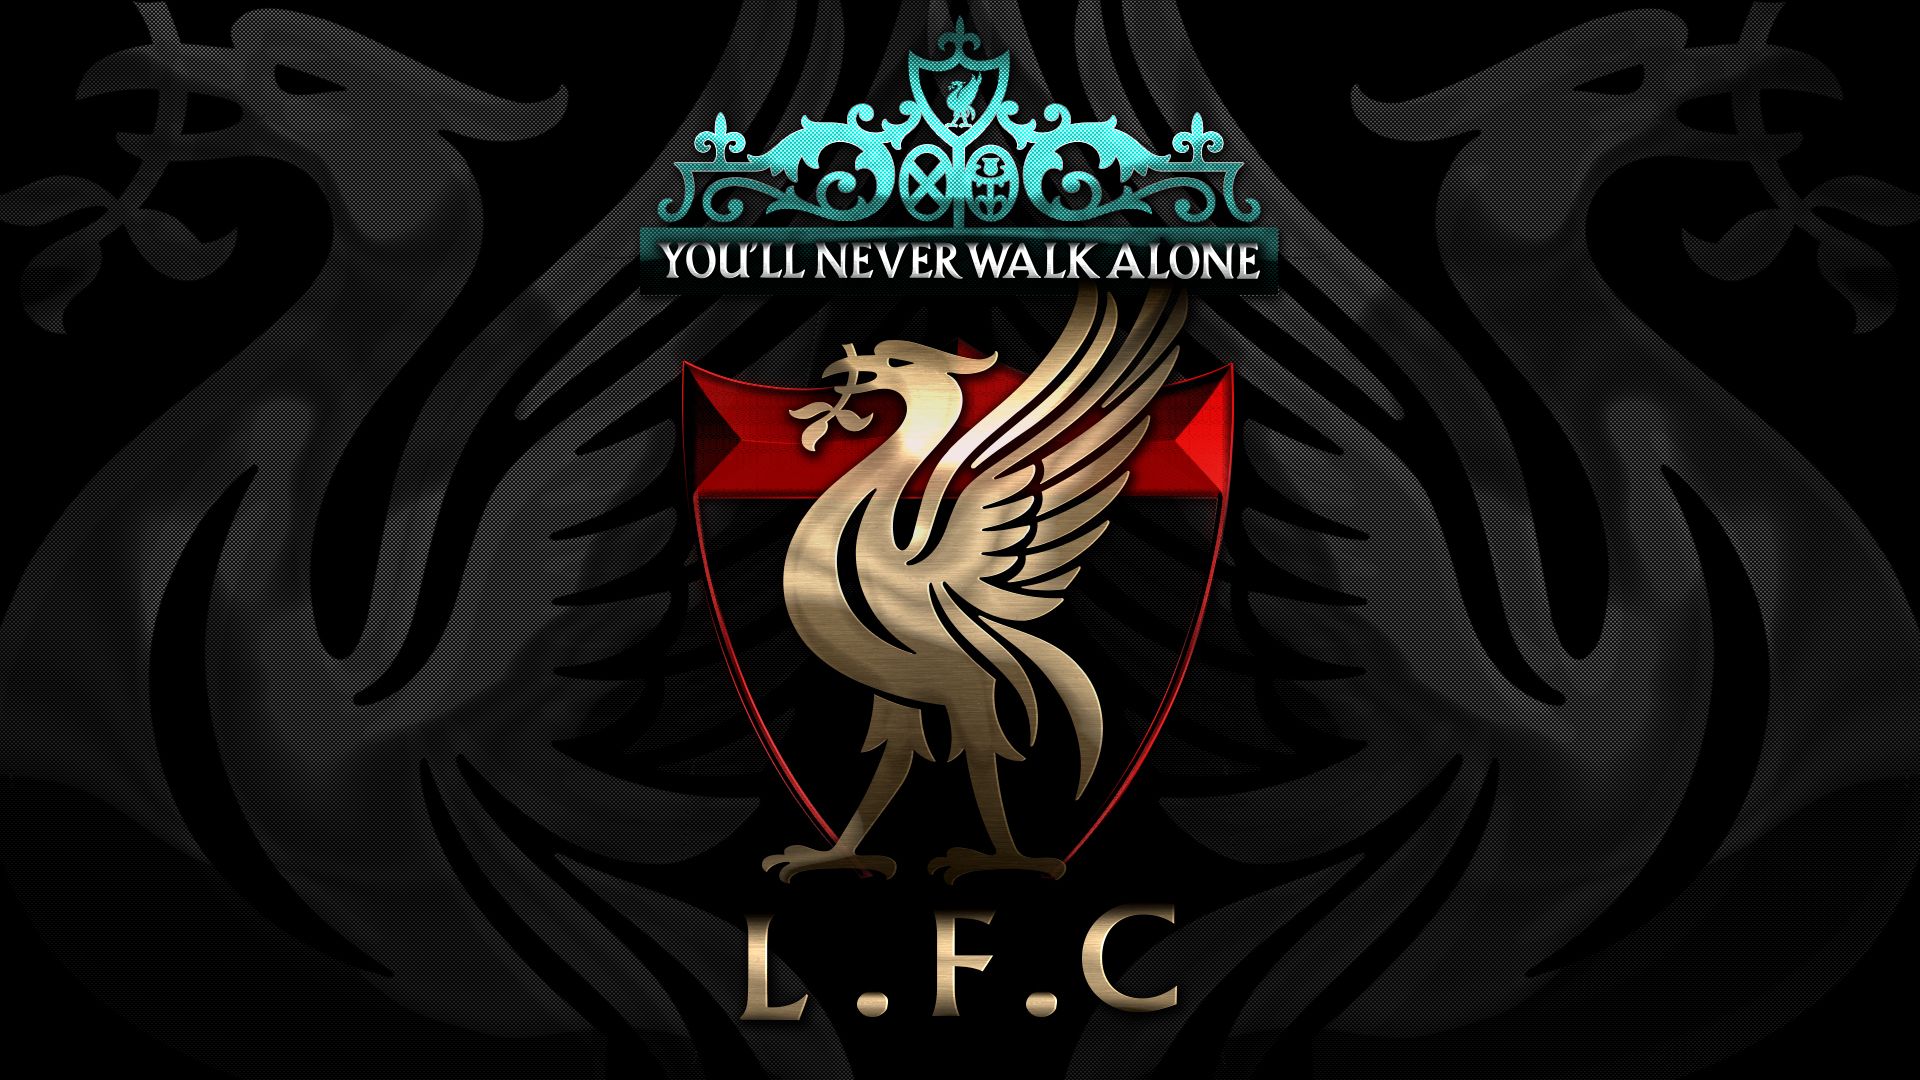 Liverpool FC Wallpaper Wide Images 56527 1920x1080 px